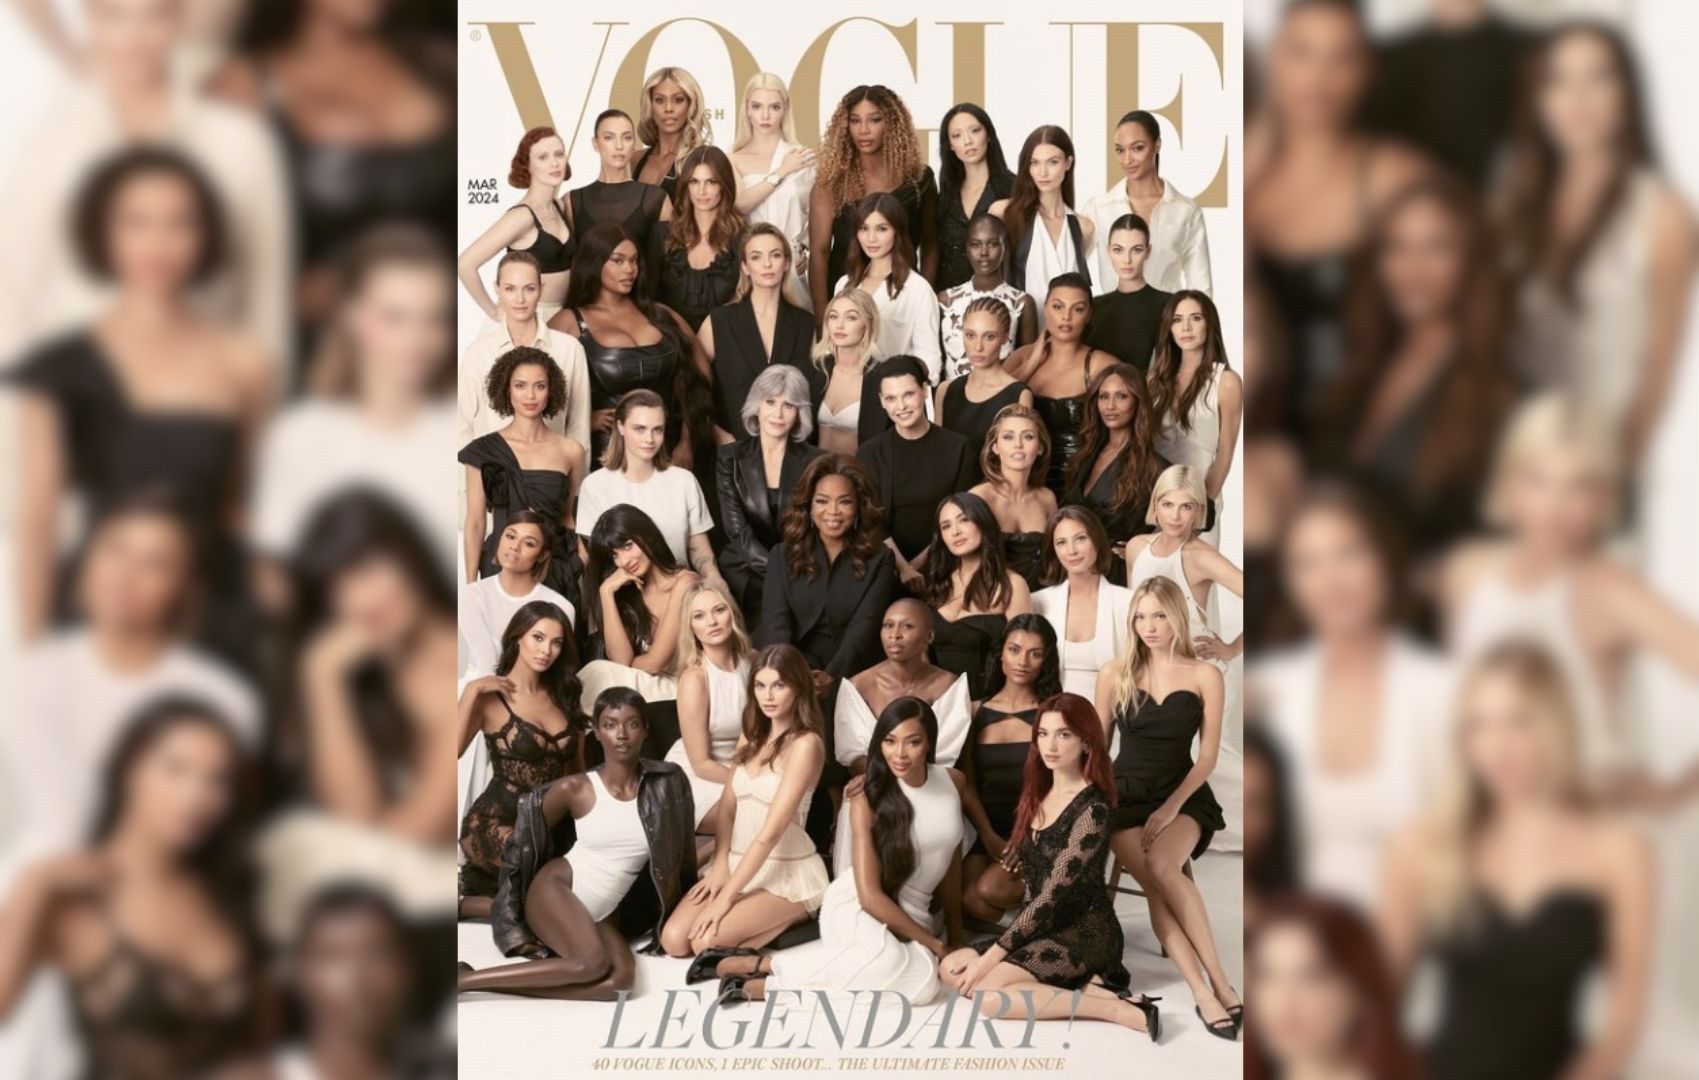 British Vogue taps 40 fashion icons for EIC’s final cover